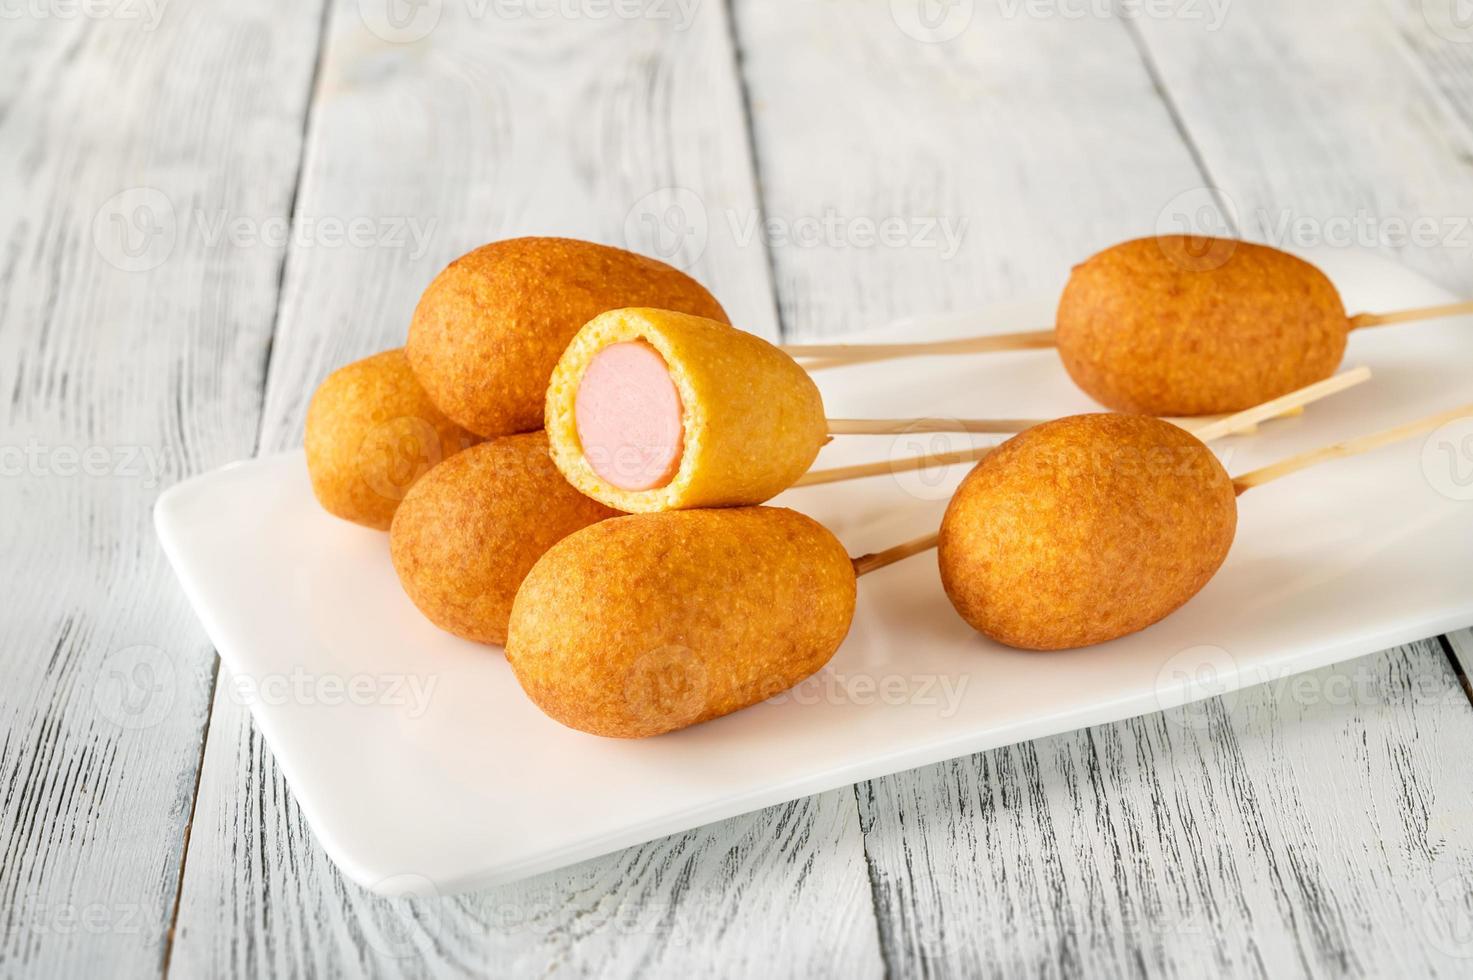 Corn dogs on white serving plate photo